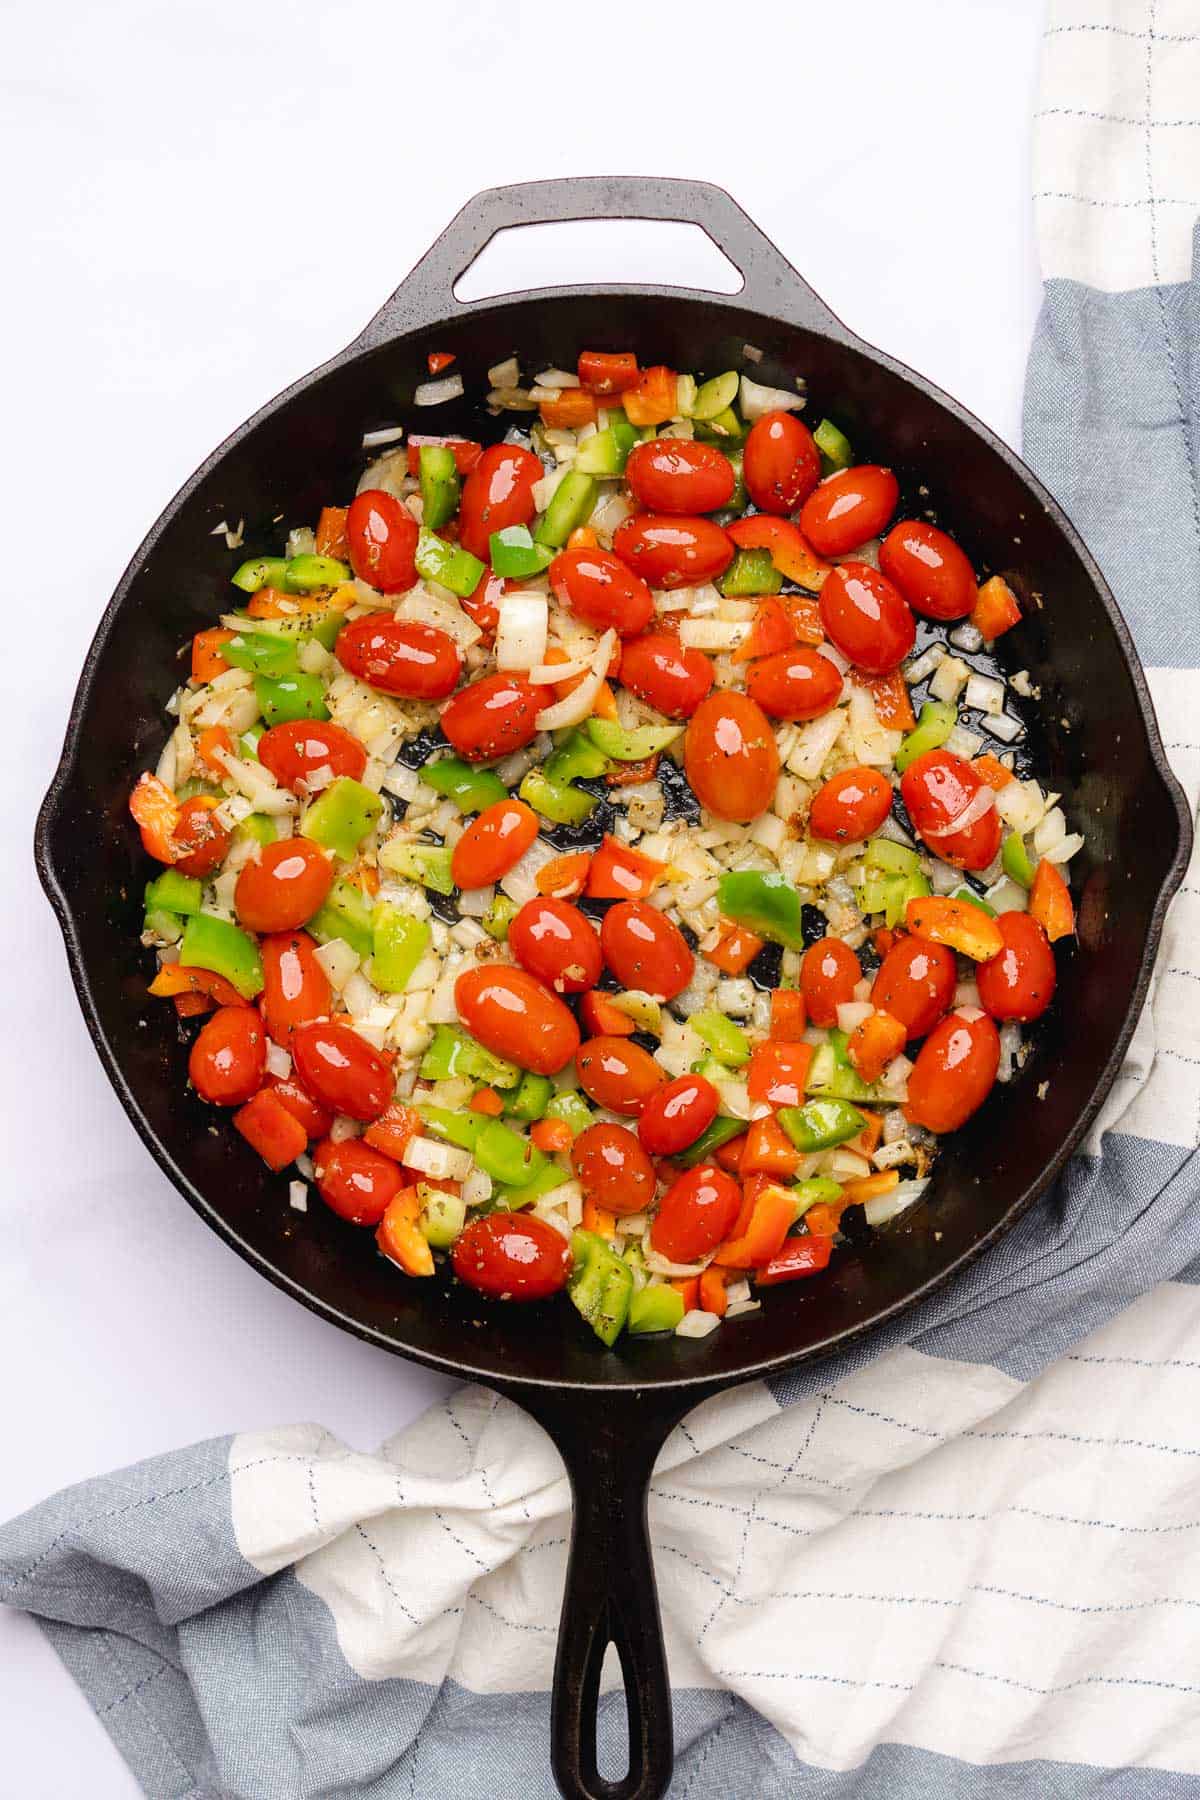 tomatoes, bell peppers, and onion in a cast iron skillet